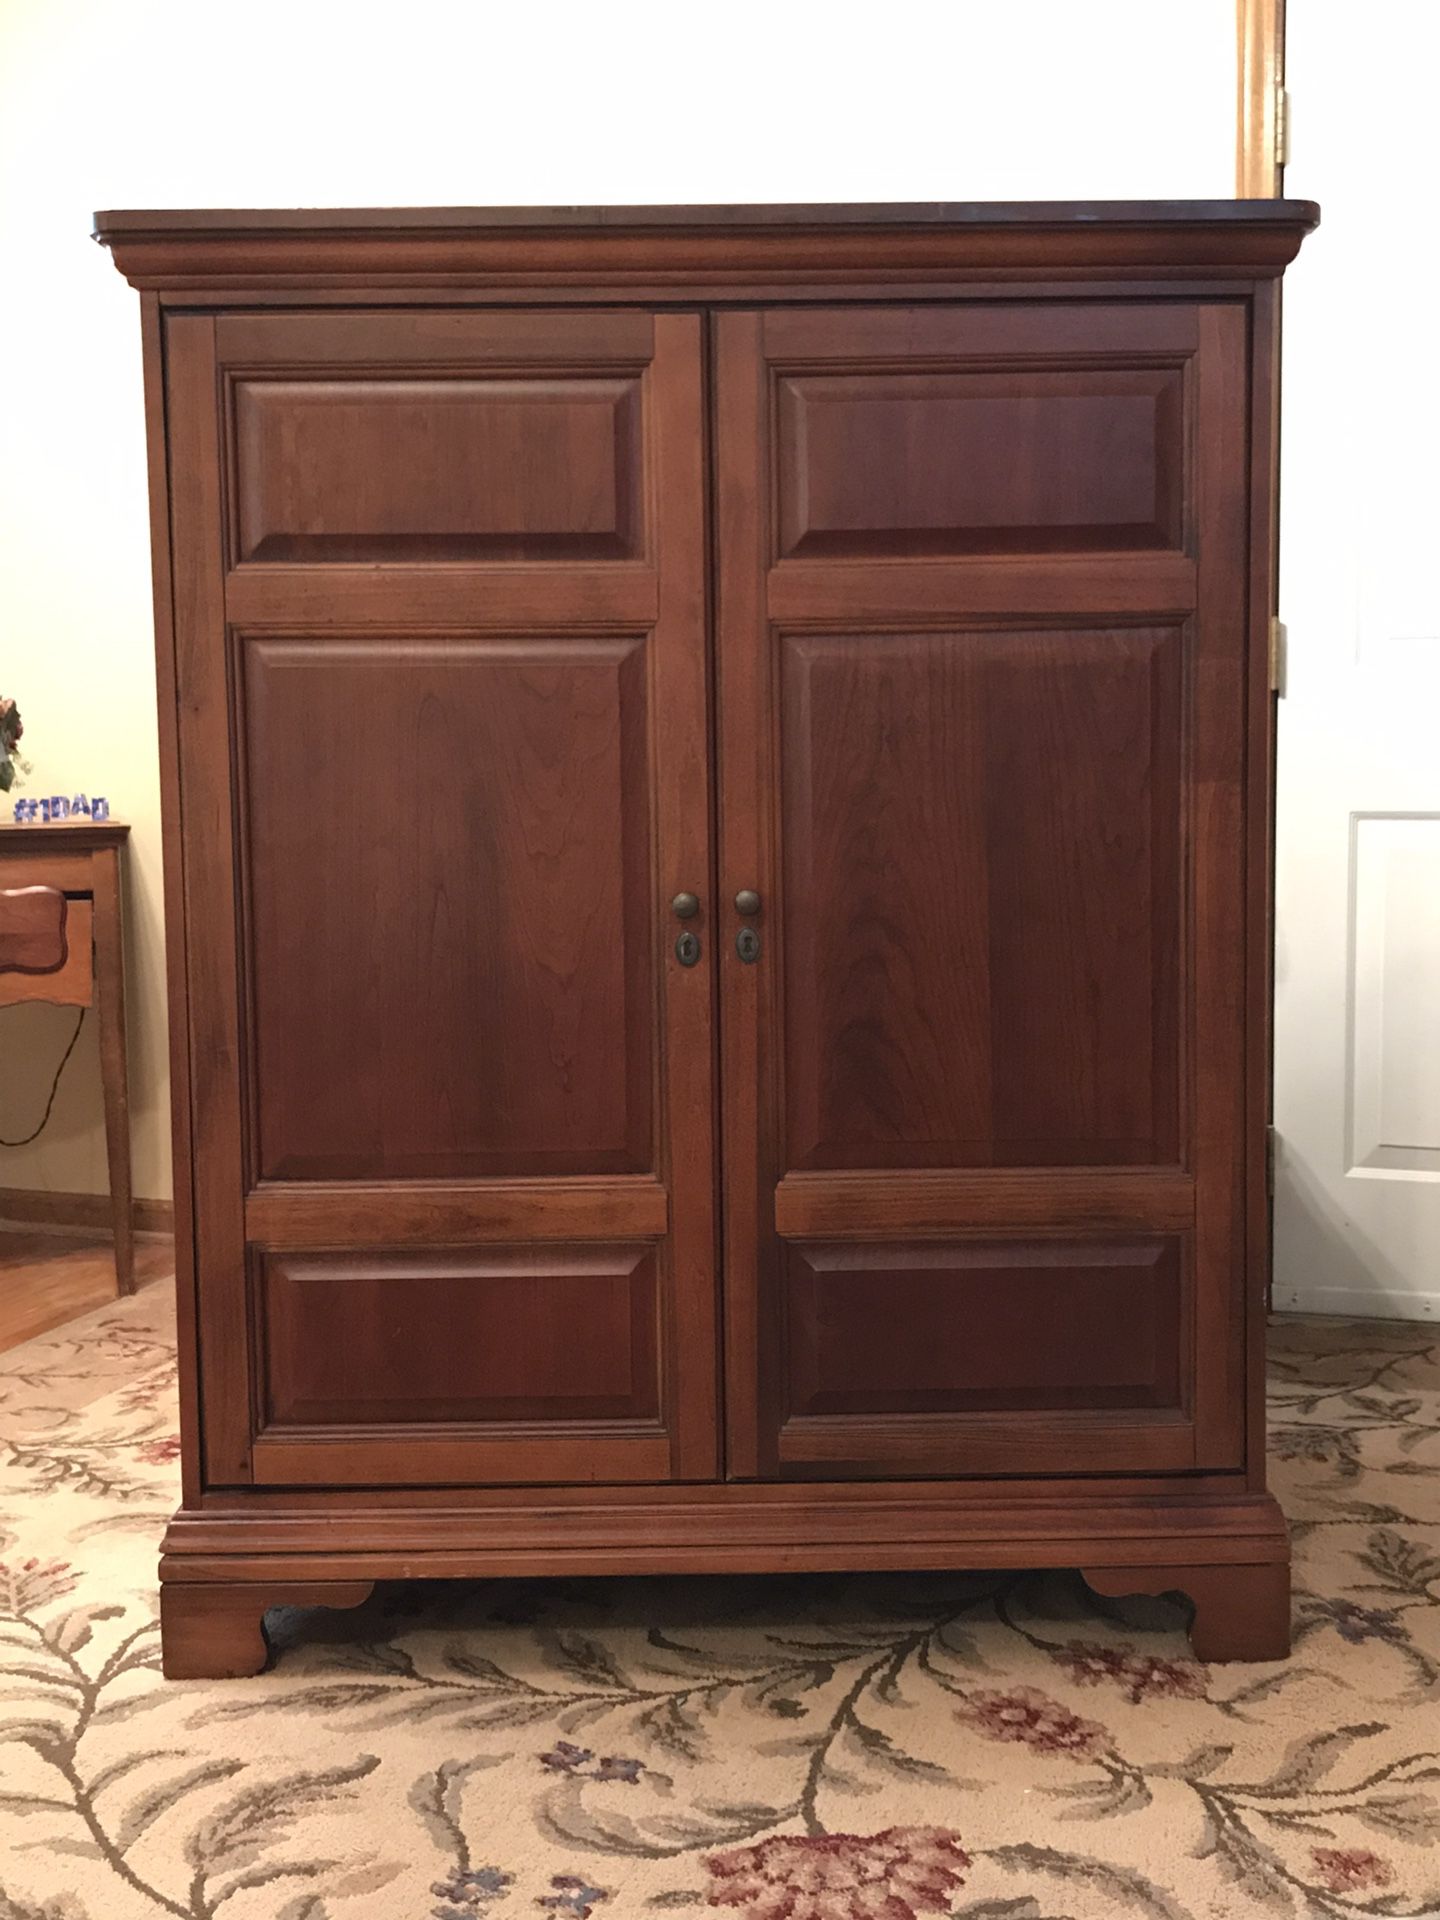 Tv stand armoire